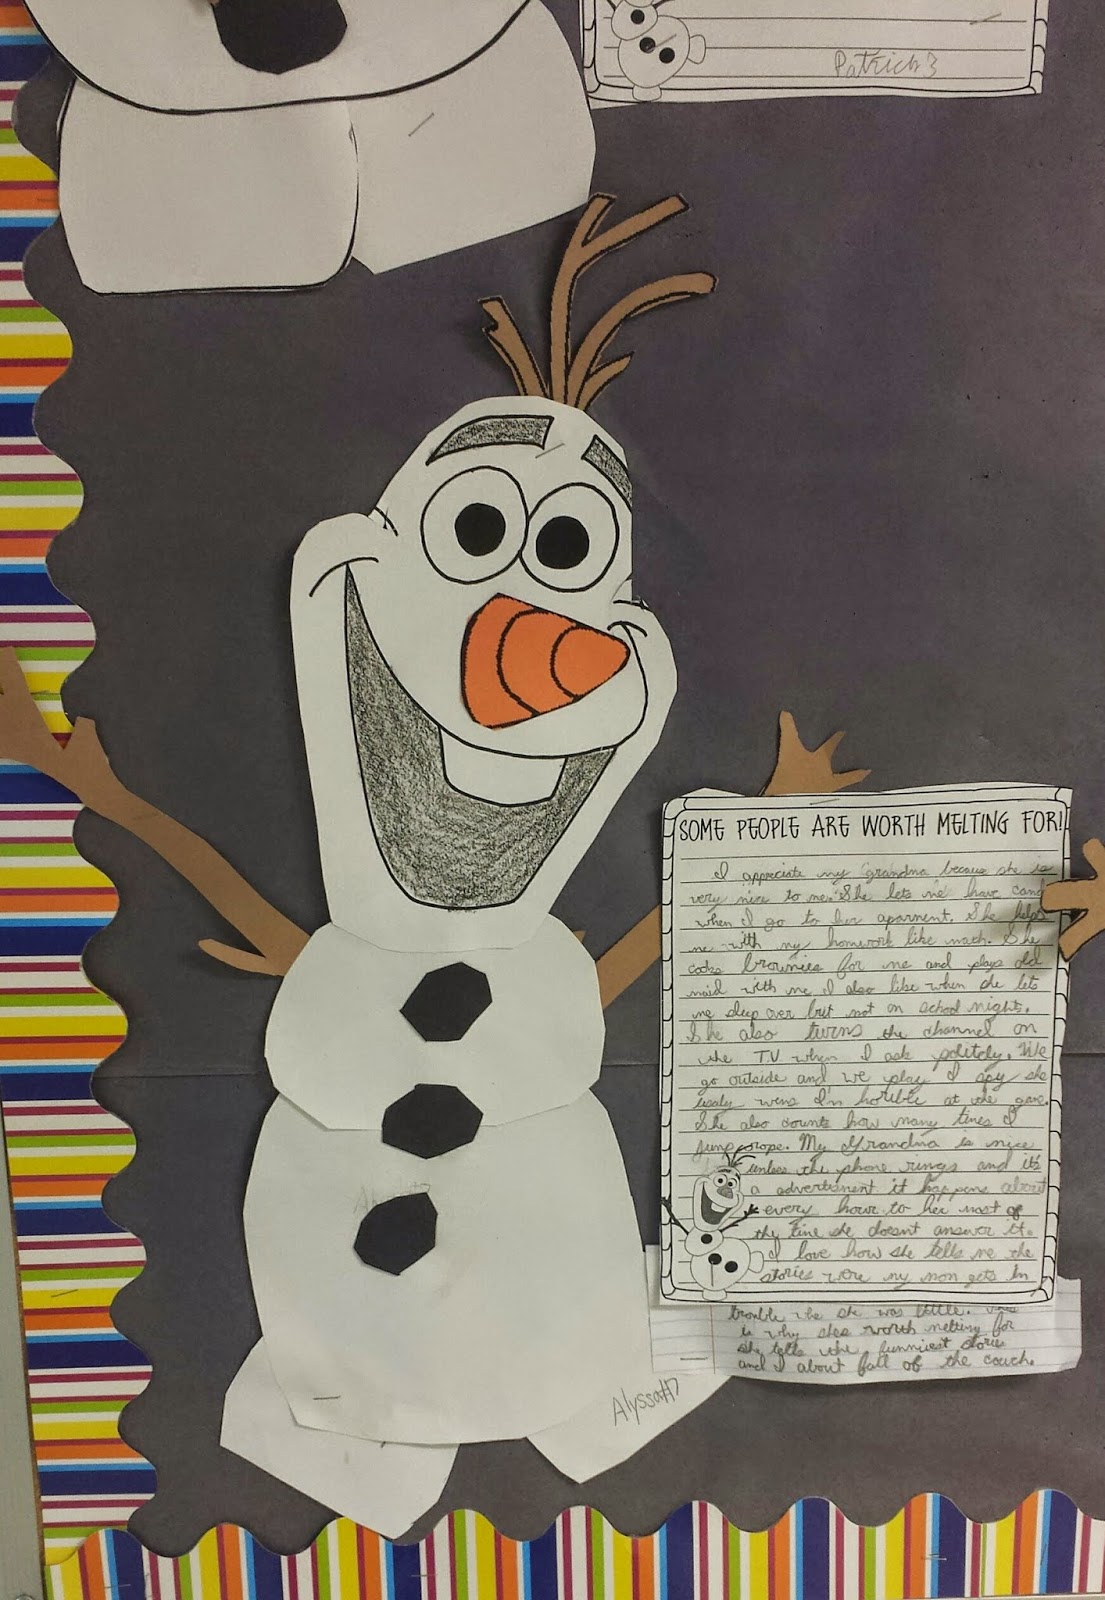 Some people are worth melting for writing activity for first grade